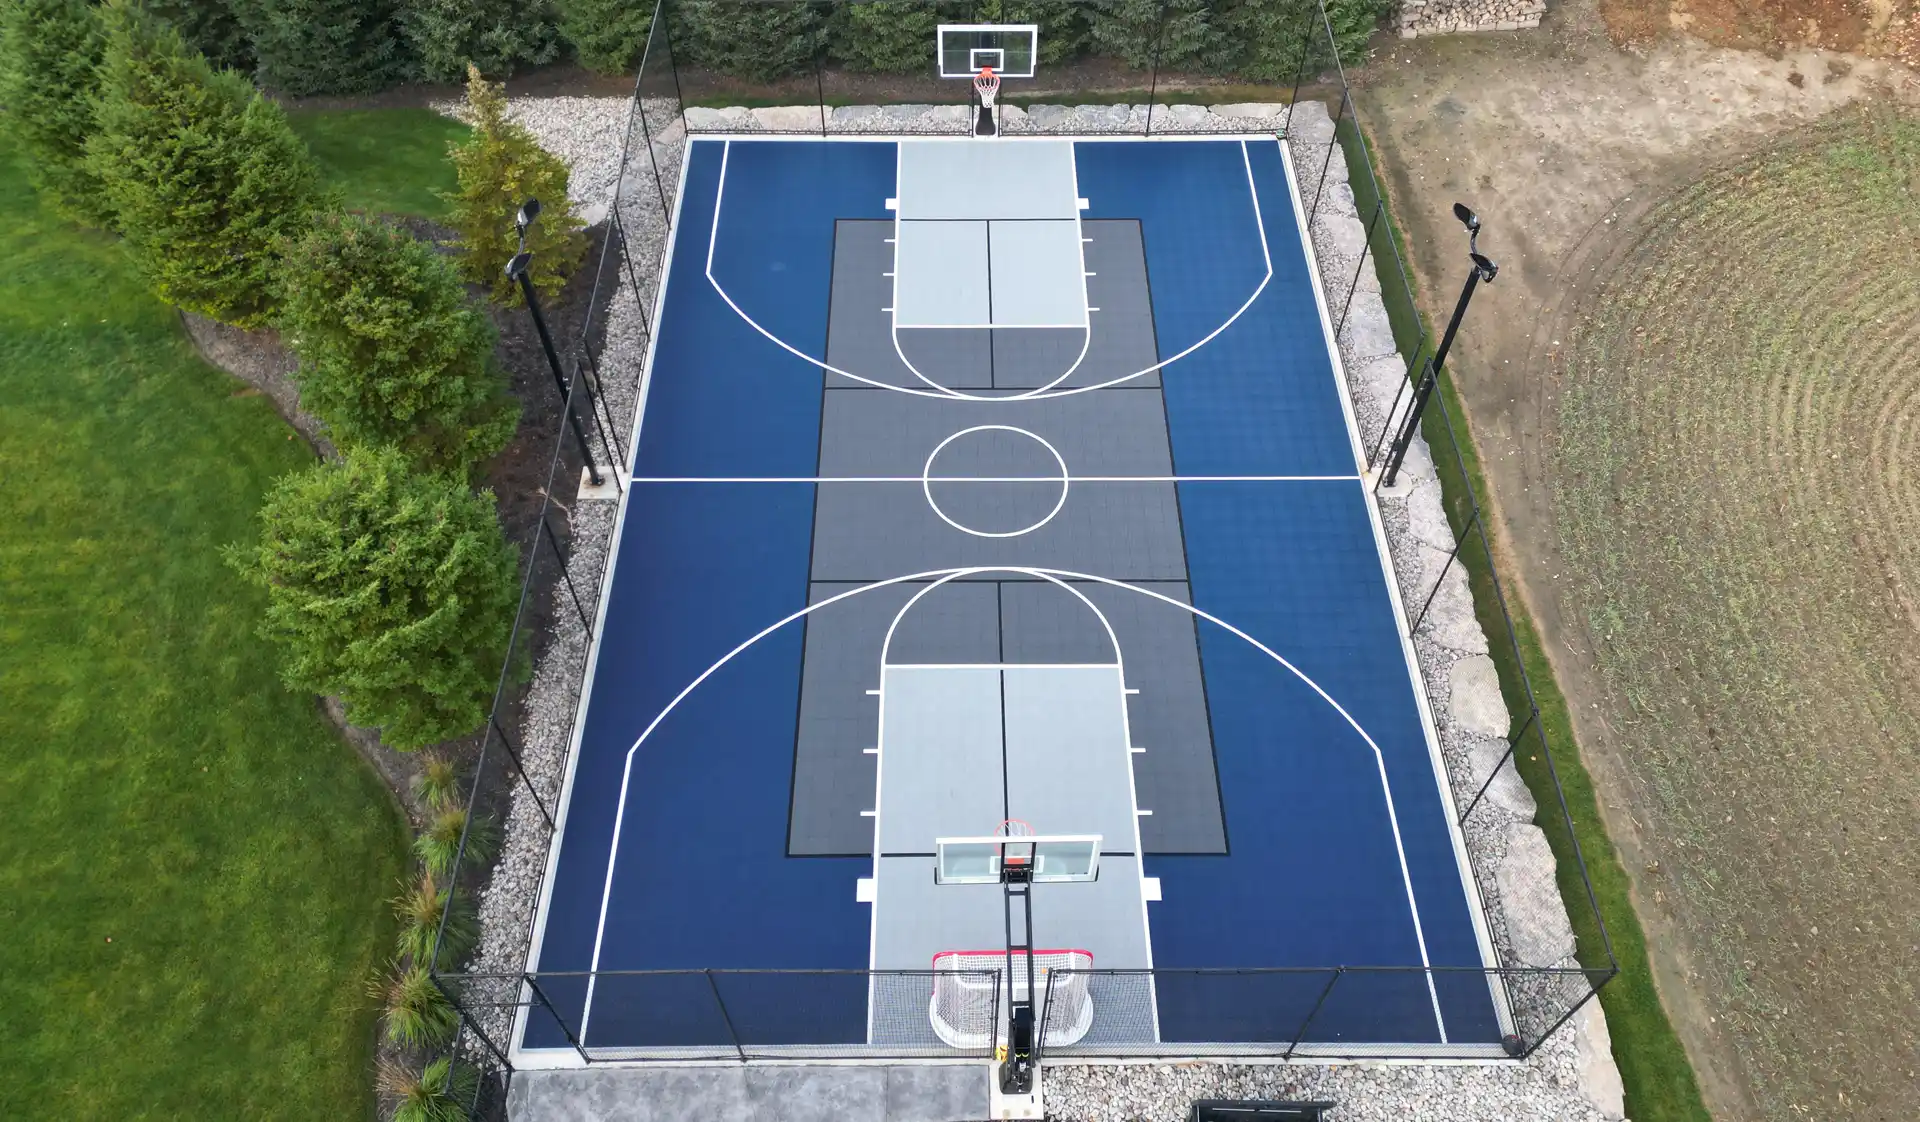 Large Multi Game Backyard Court, in Vanessa, ON